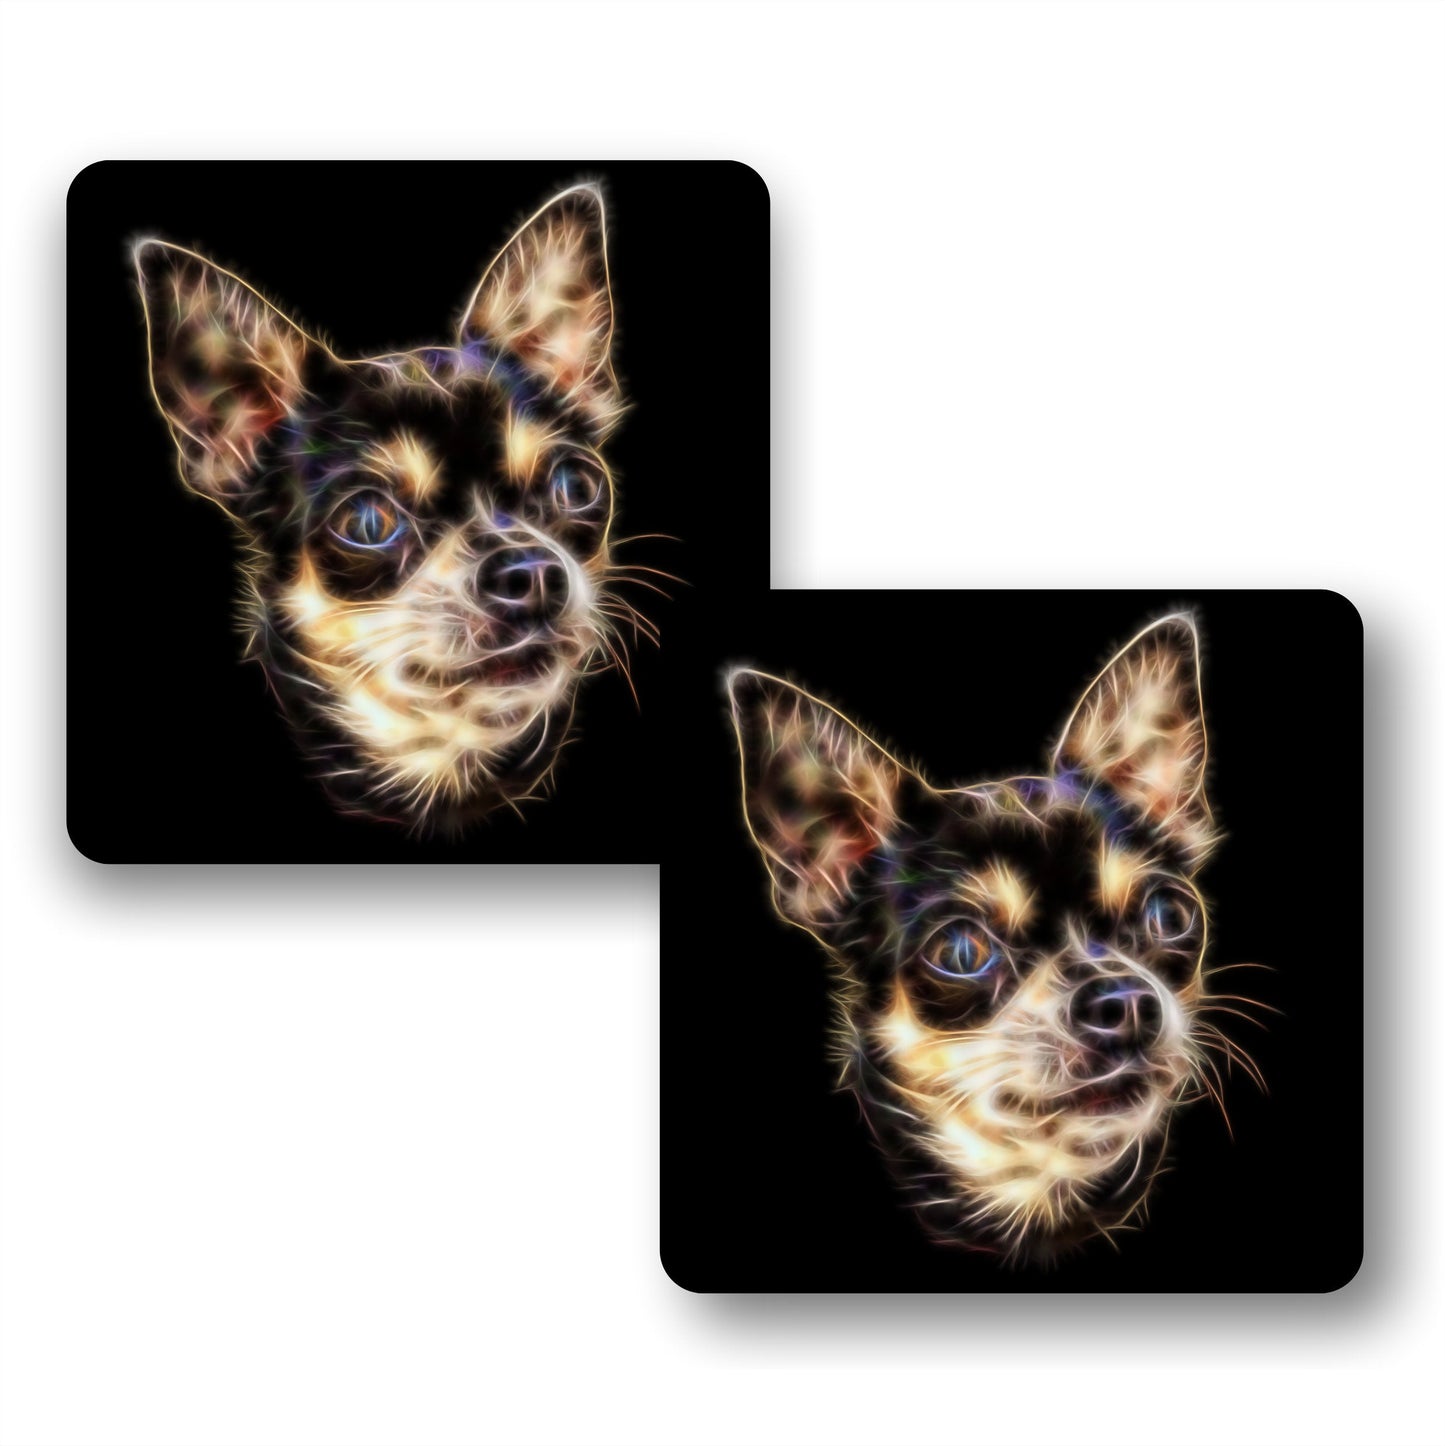 Chihuahua Coasters, Set of 2, with Fractal Art Design. Chocolate and Tan.